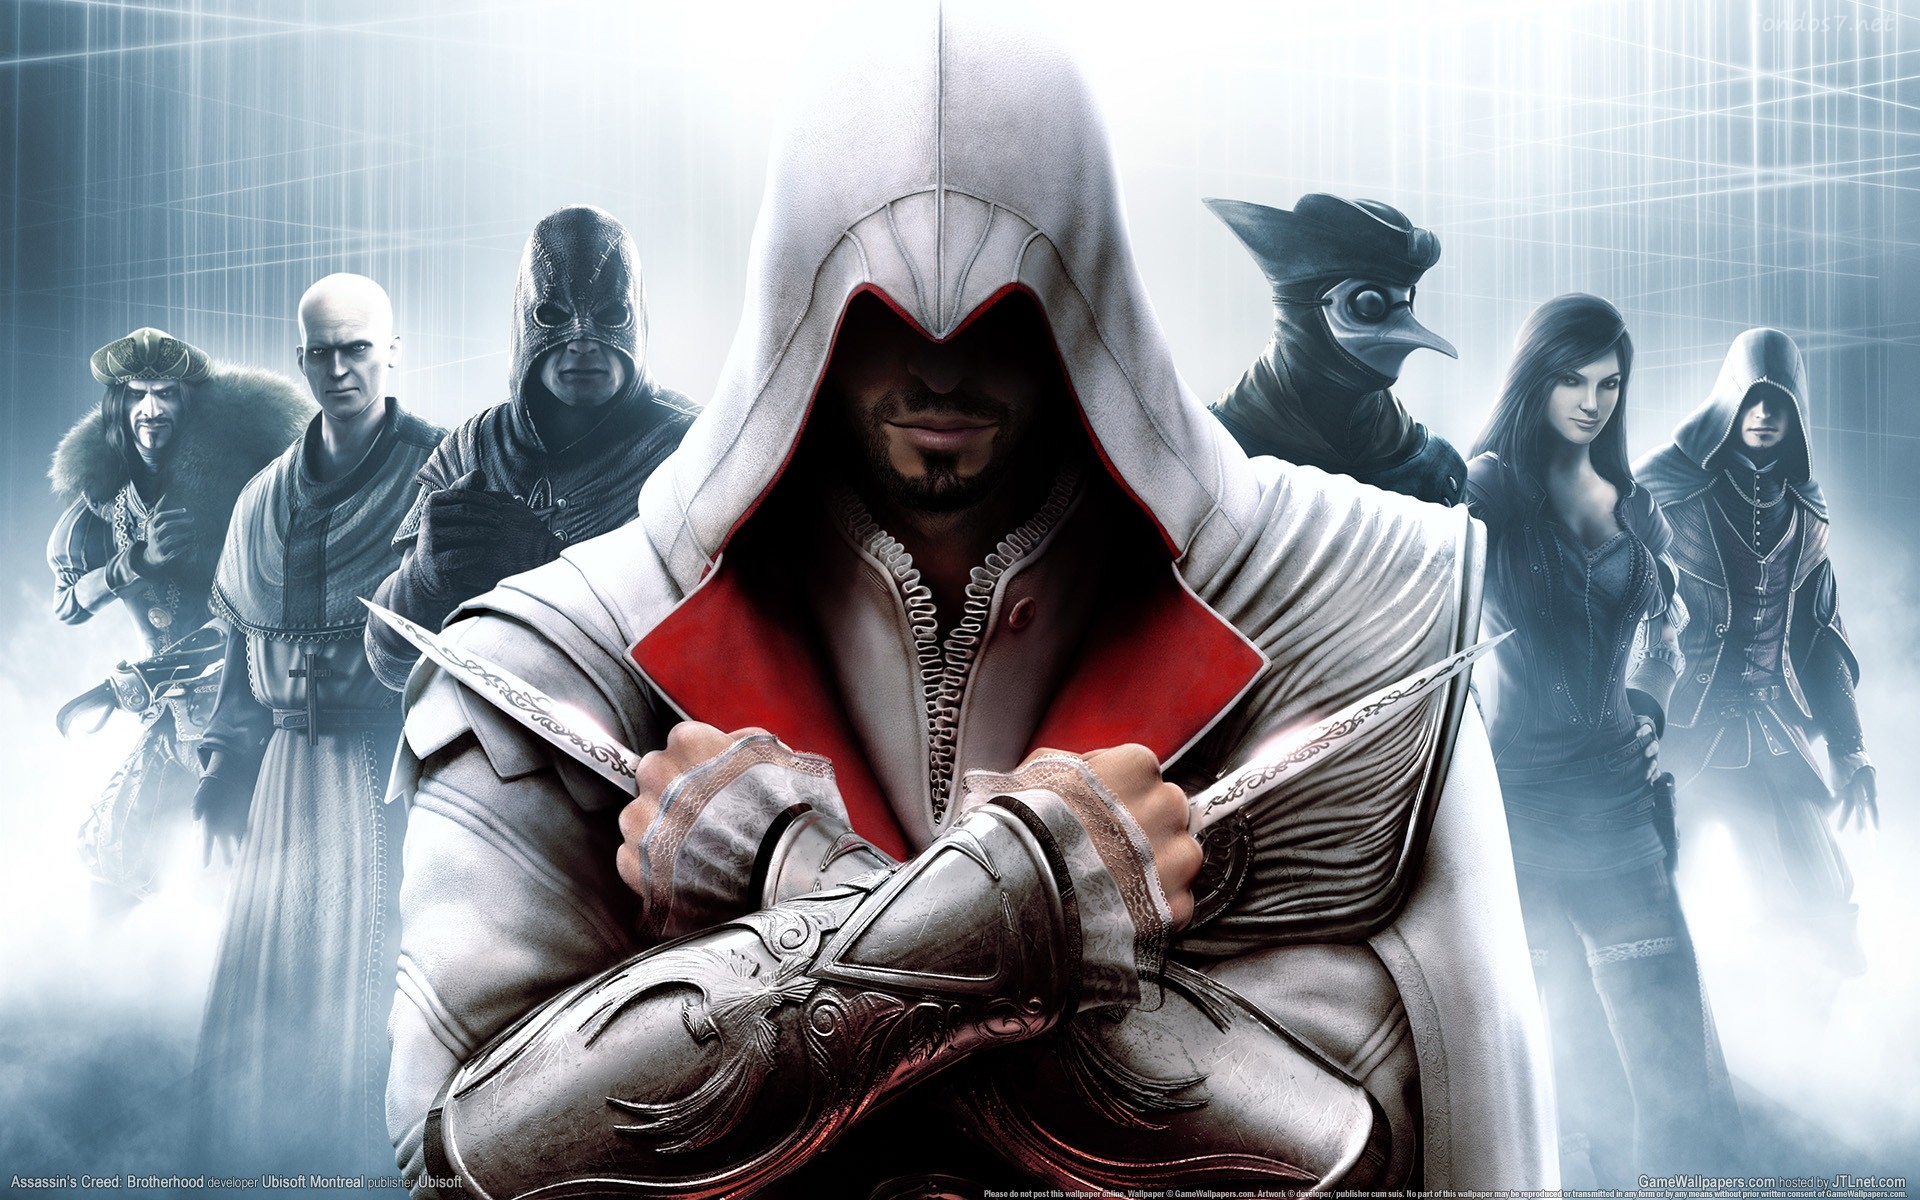 Next “Assassin’s Creed” May Skip 2016 - Also May Be Set in Egypt